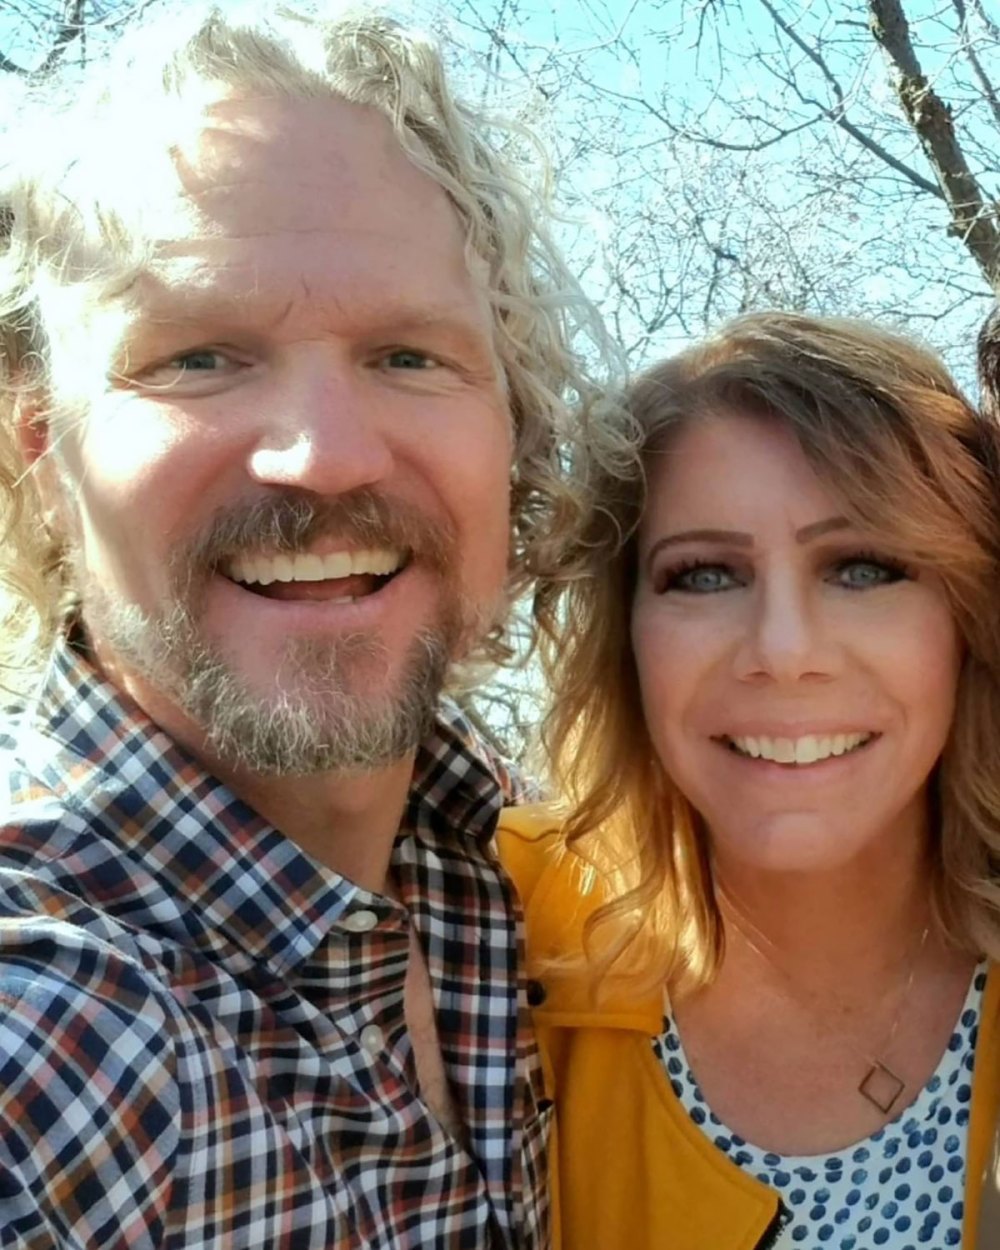 Sister Wives' Meri Brown Hints at 'Being Fully Manipulated' in Cryptic Post